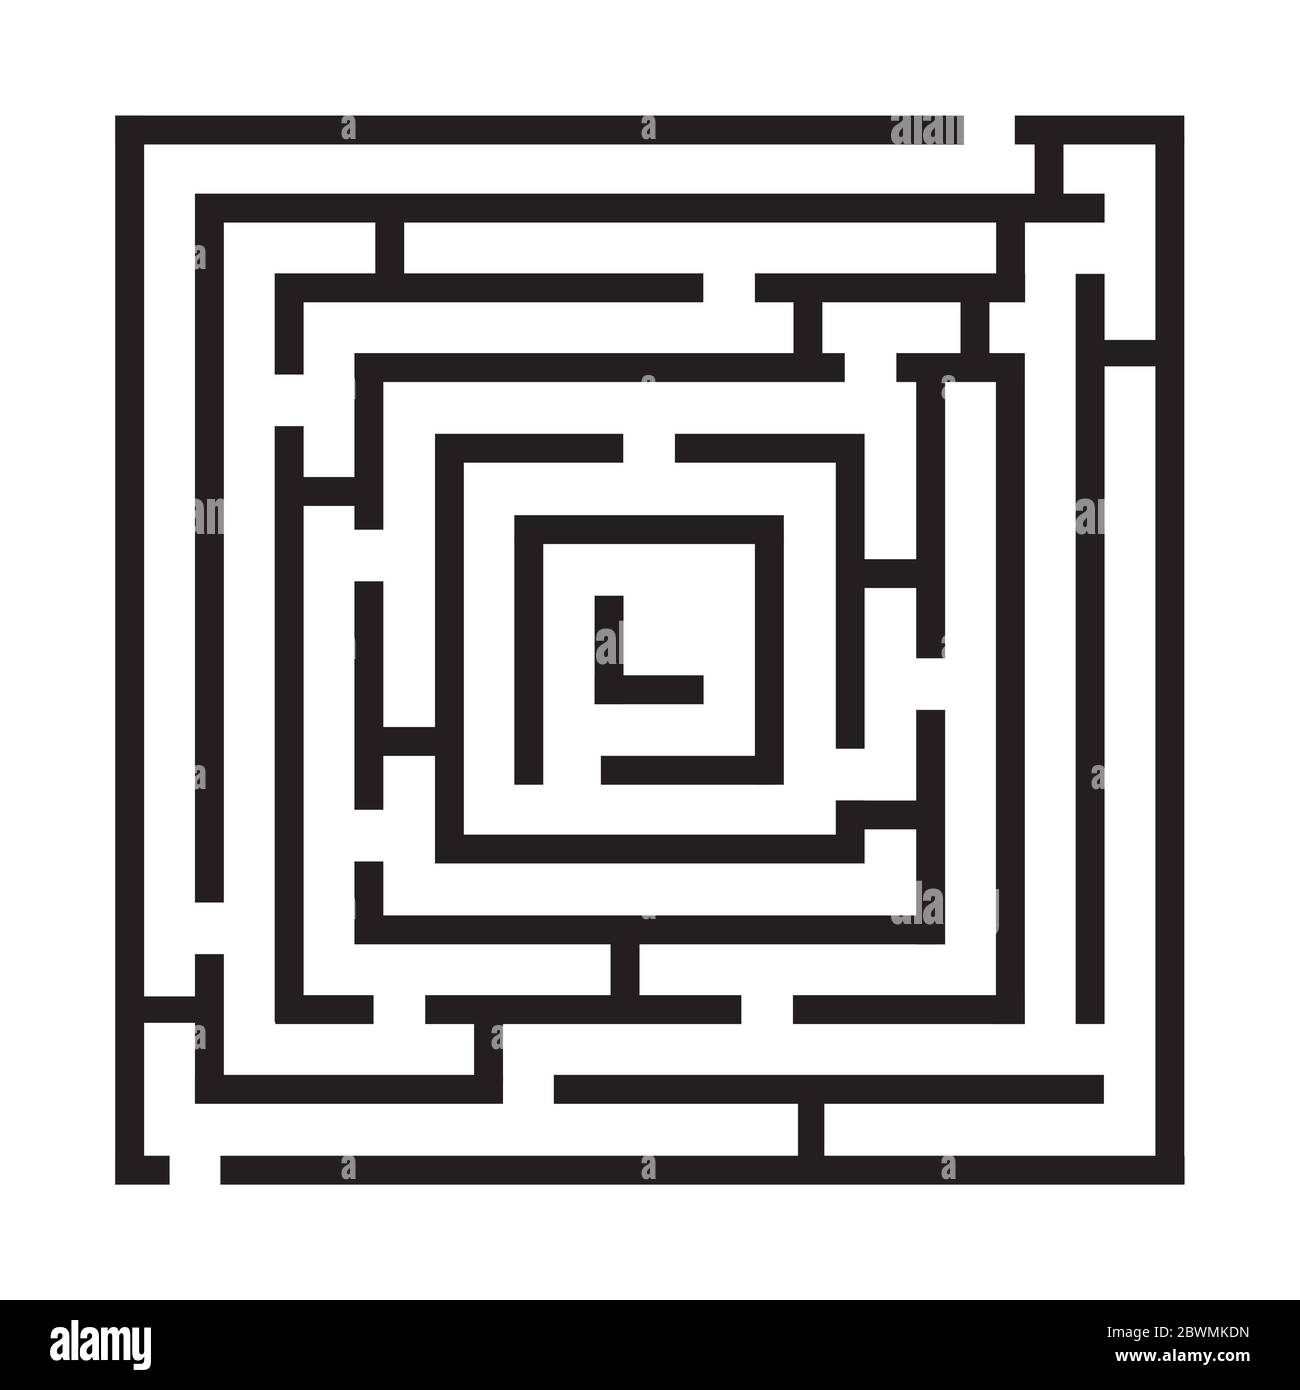 rectangle labyrinth game, maze puzzle,isolated on white background,vector illustration Stock Vector